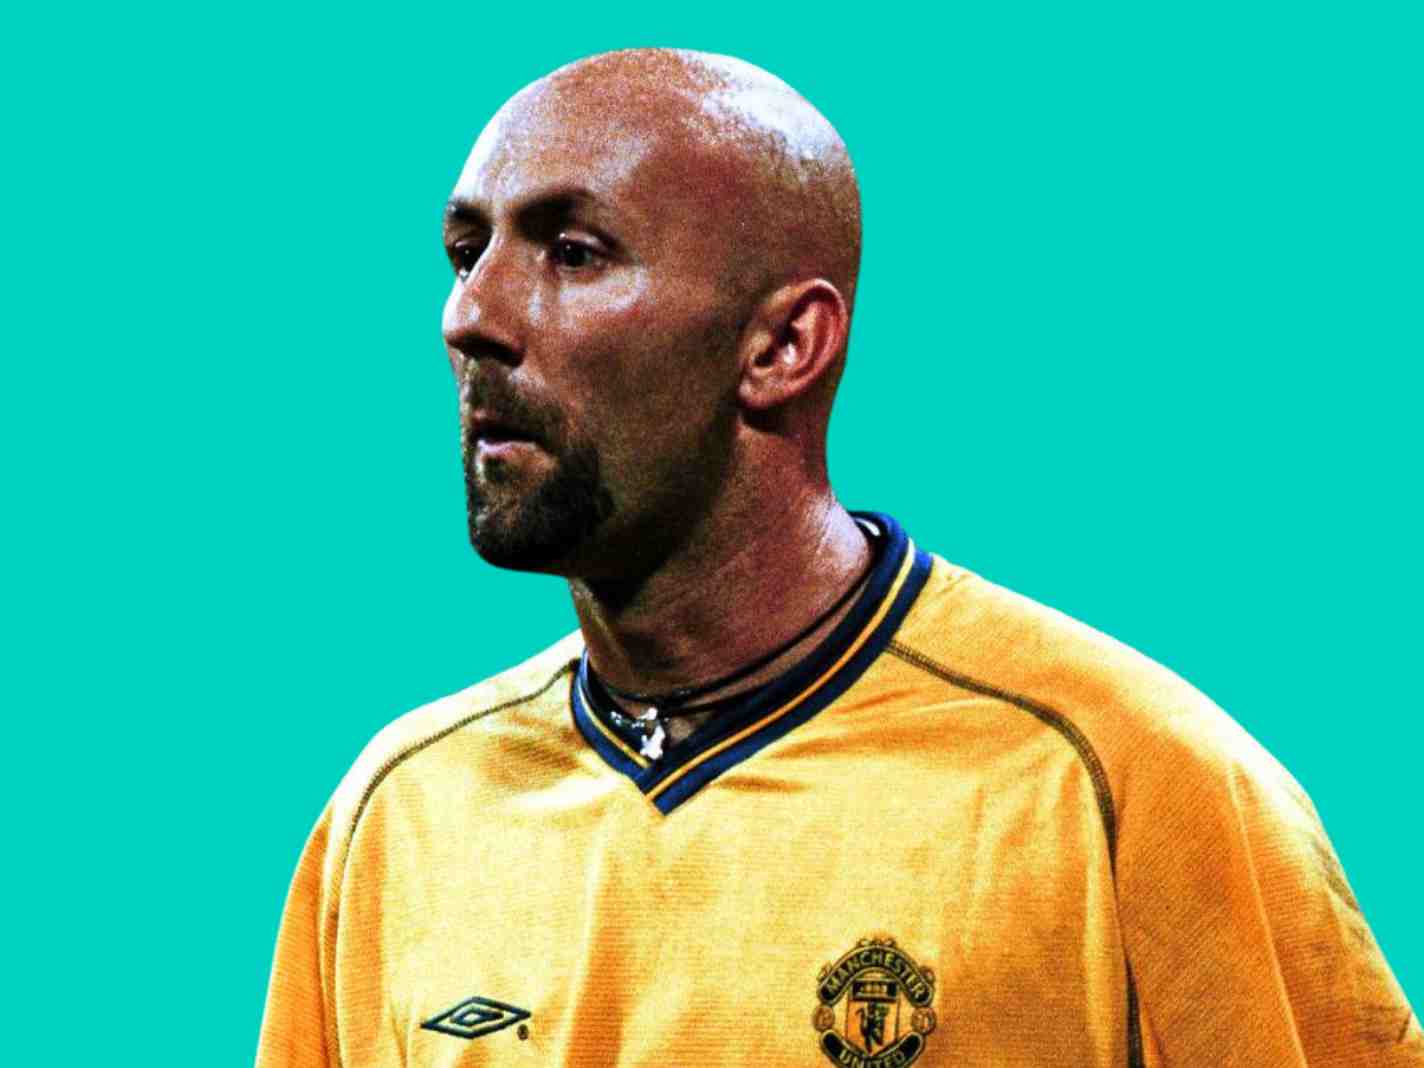 Vintage photo of Fabien Barthez with hair leaves fans in disbelief